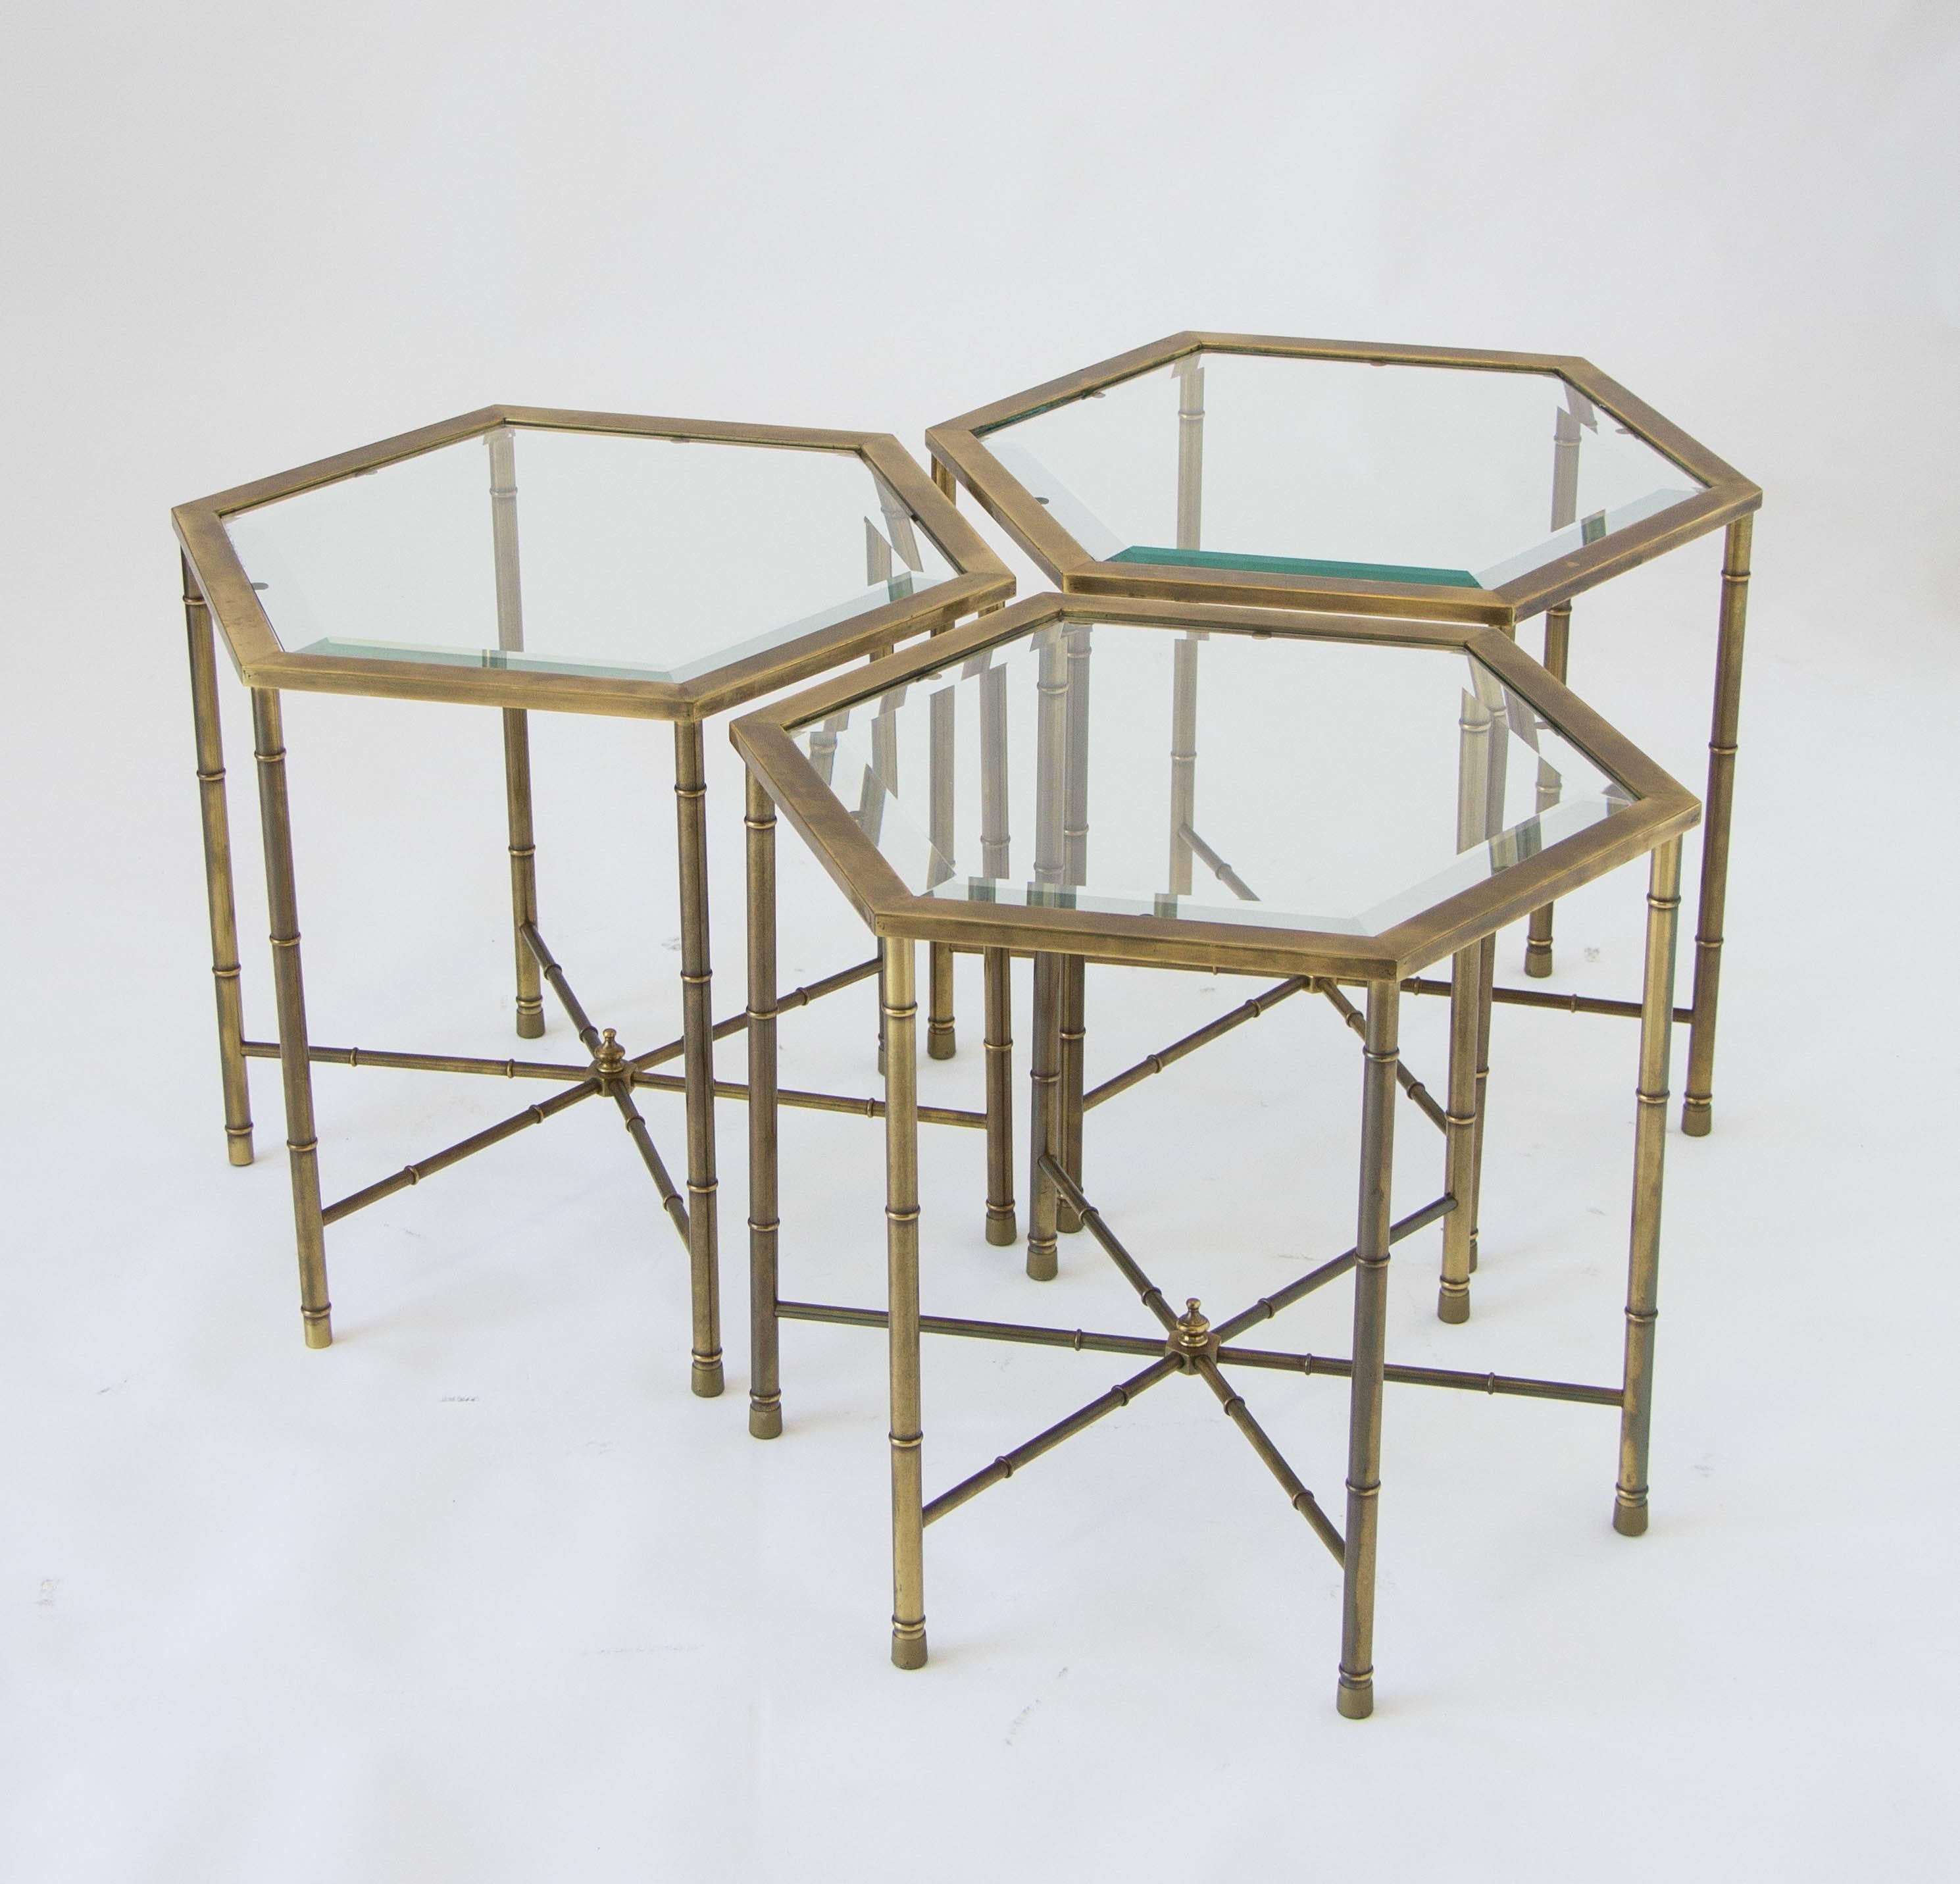 Three hexagonal brass side tables from Grand Rapids manufacturer Mastercraft. Each table has a six-sided frame in burnished brass, with ribbed legs and six brass spoke cross-supports. Removable table tops are the original beveled glass. The tables